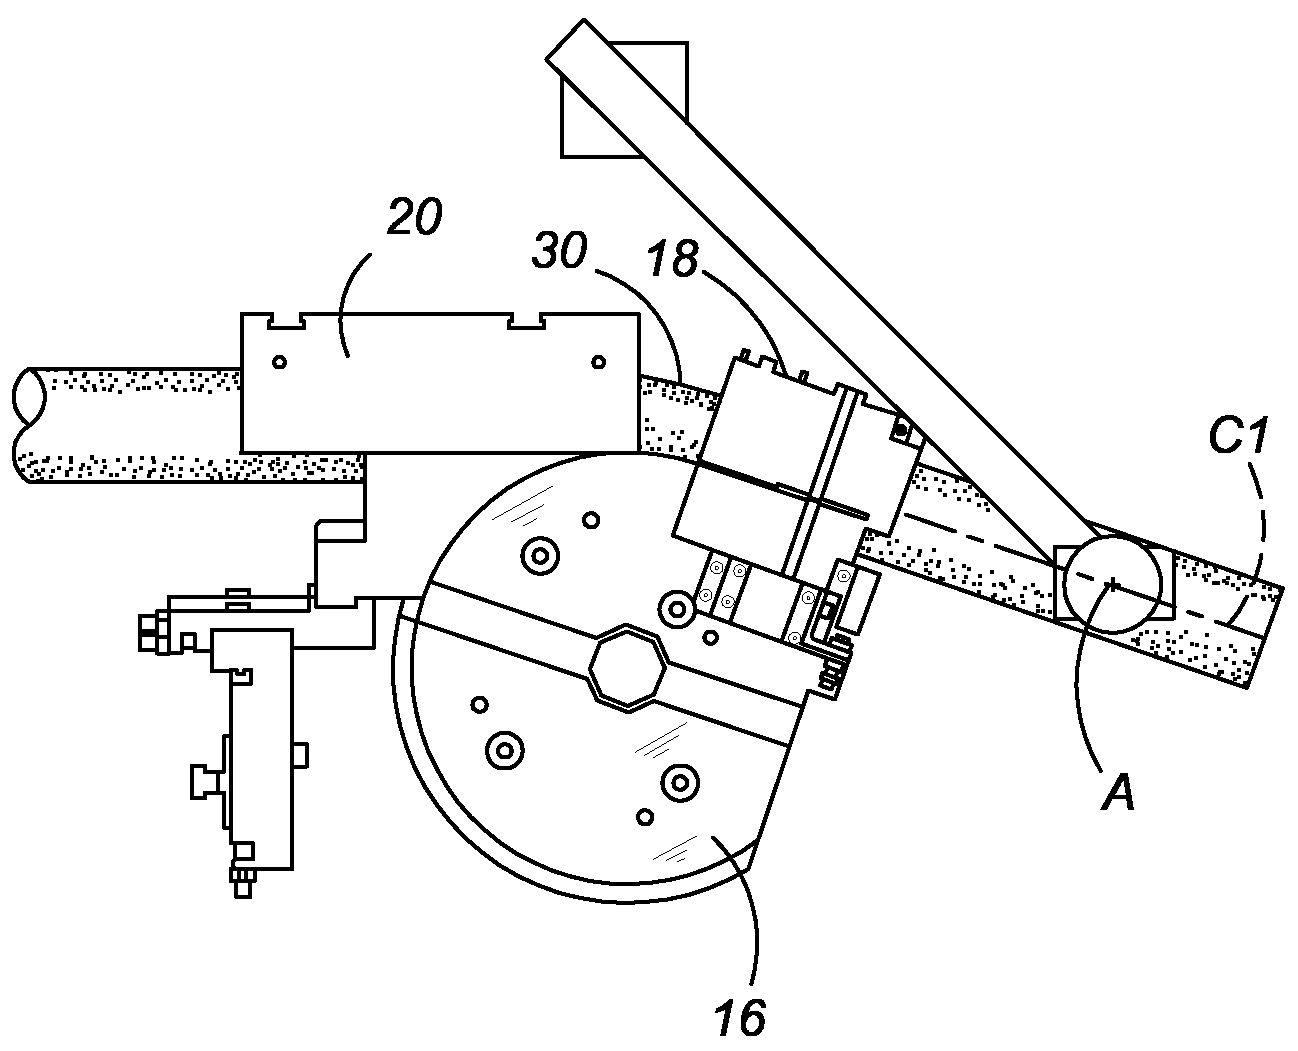 Bending apparatus and method of bending a metal object